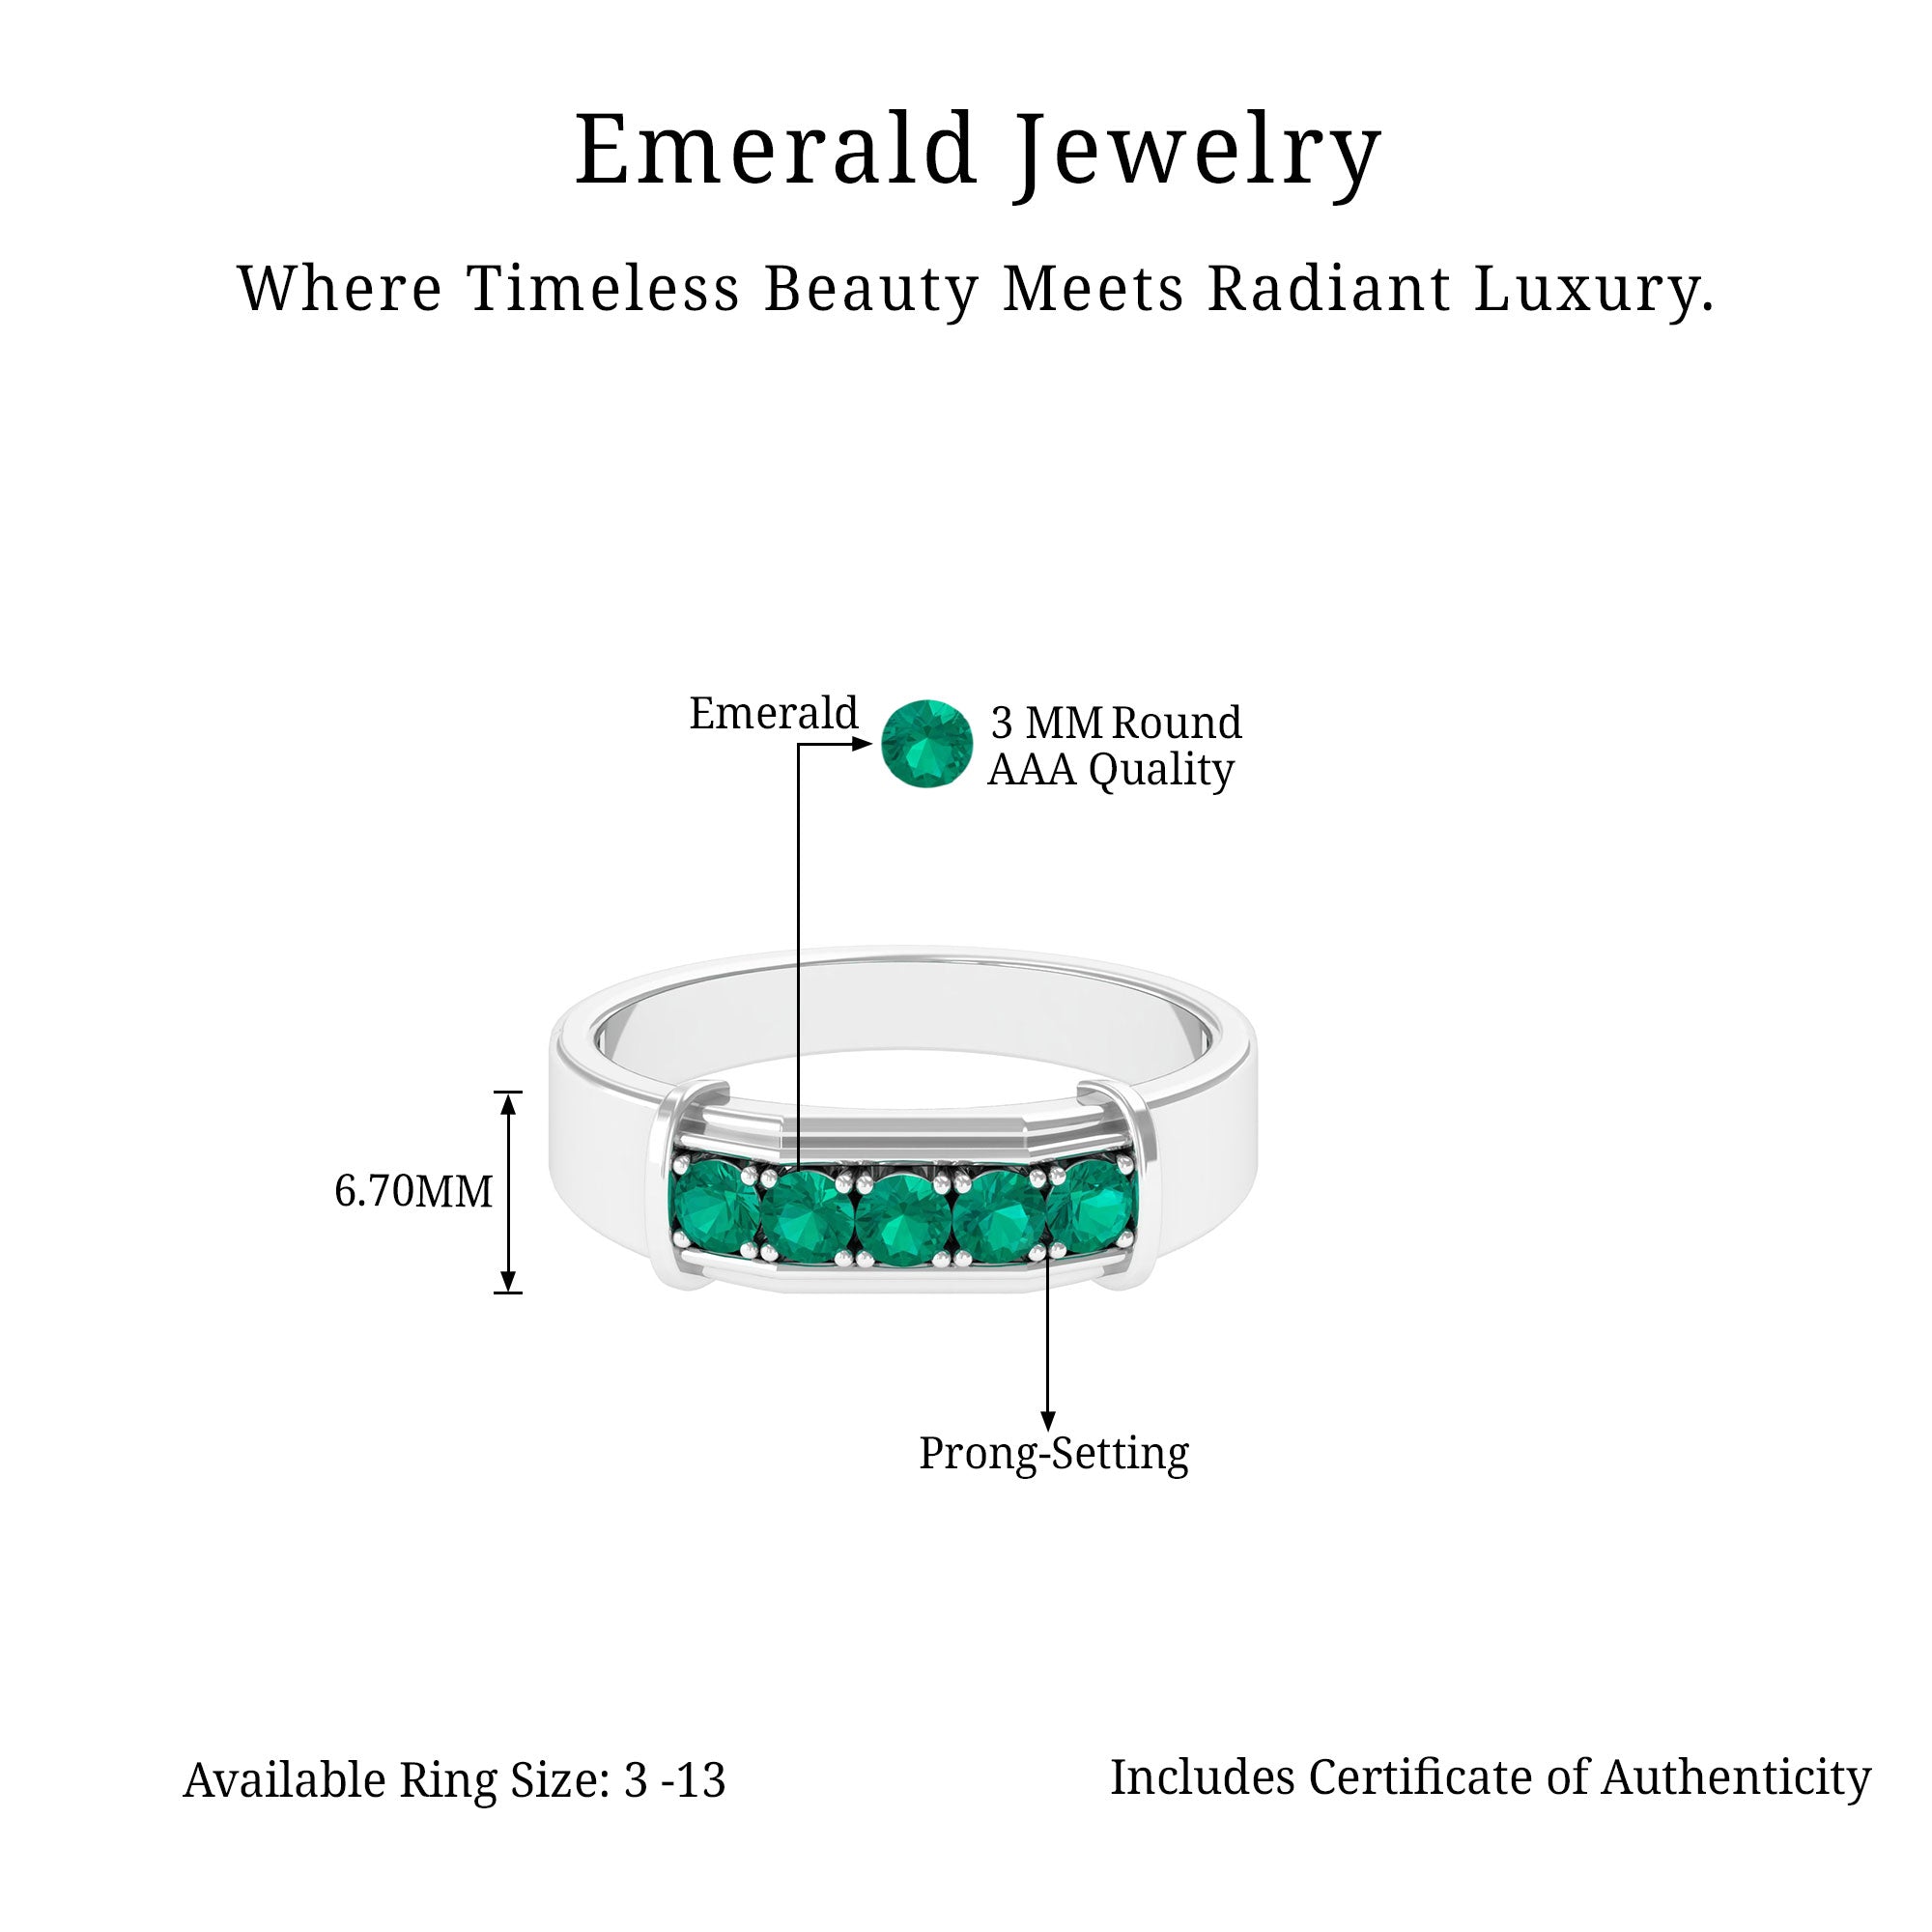 Classic Emerald Five Stone Wedding Band Ring for Men Natural Emerald-AAA Quality - Virica Jewels